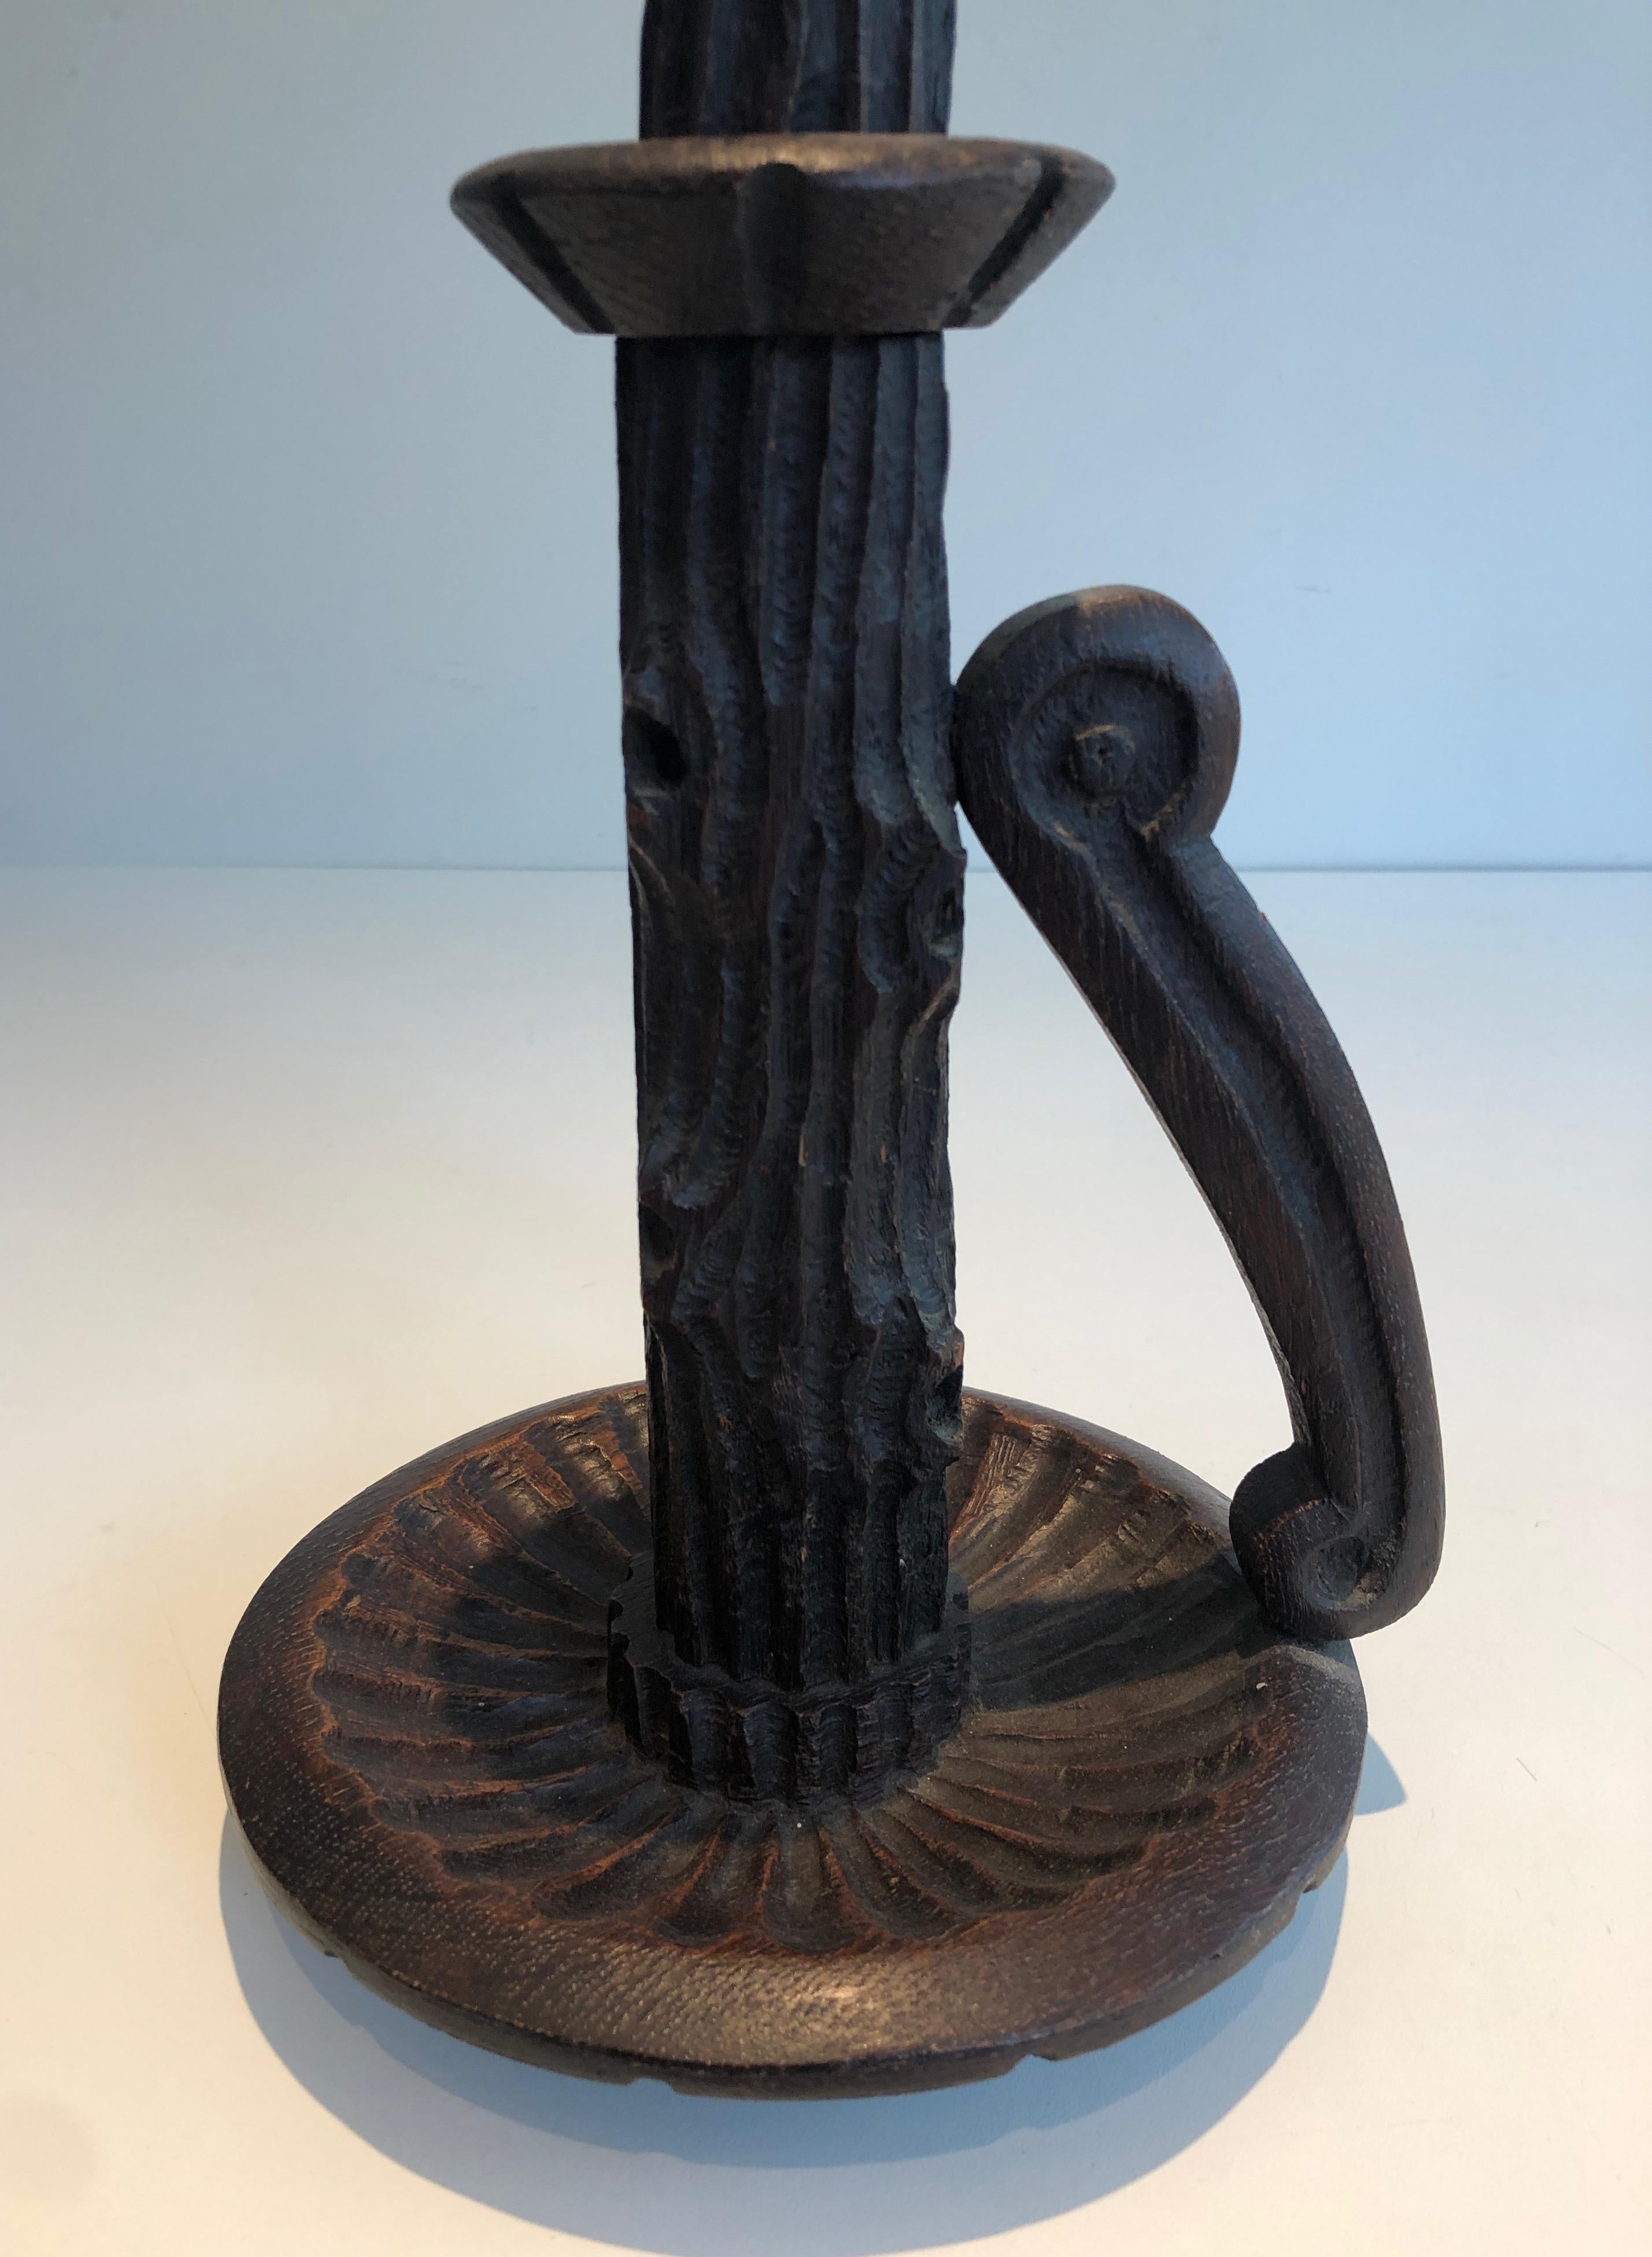 Pair of Tall Brutalist Candle Holders Made of Carved Wood, French, circa 1950 For Sale 6